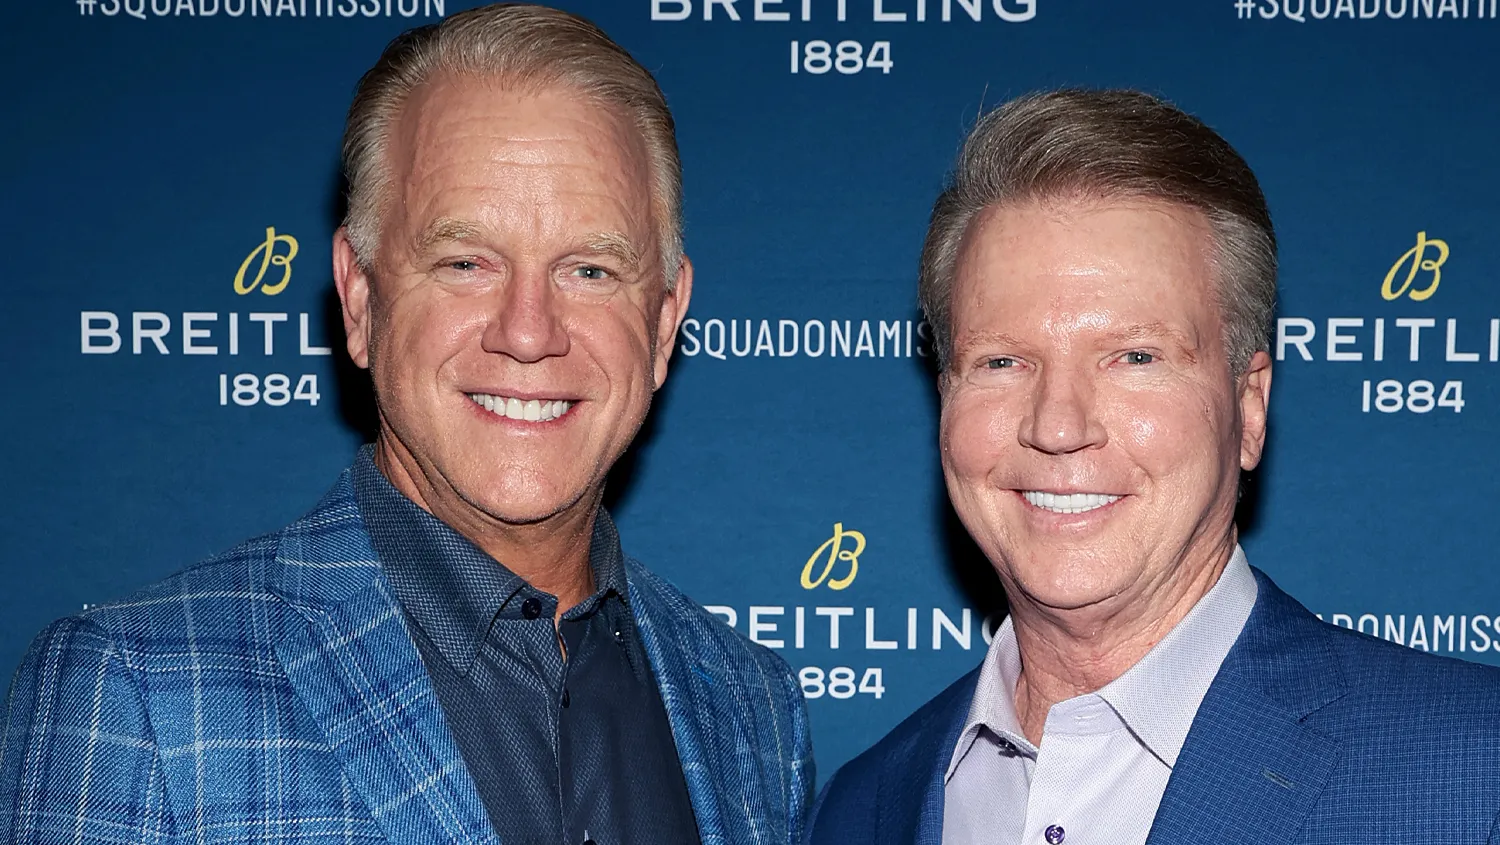 Boomer Esiason Sparks Speculation on Potential NFL and Netflix Partnership